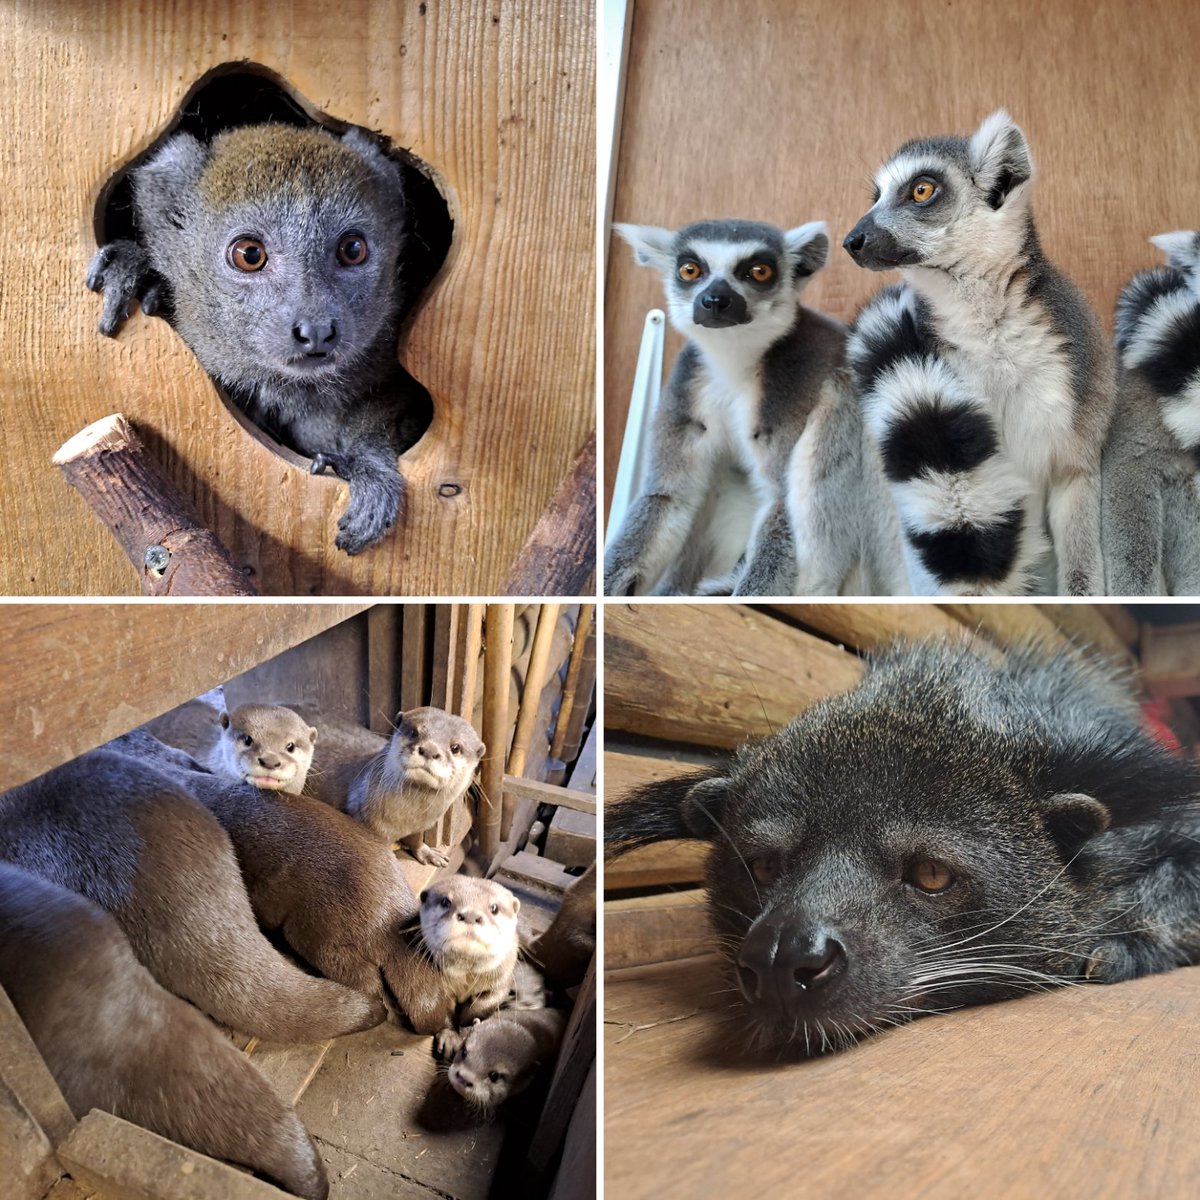 🐾 Facebook Live - Viewer's Choice 🐾 🦦 We'll have a special Viewer's Choice edition of our Facebook Live video! Let us know who you would like to see and we will do our best! 📱 We'll be live at 1PM tomorrow - see you then! #birminghamwildlifeconservationpark #facebooklive